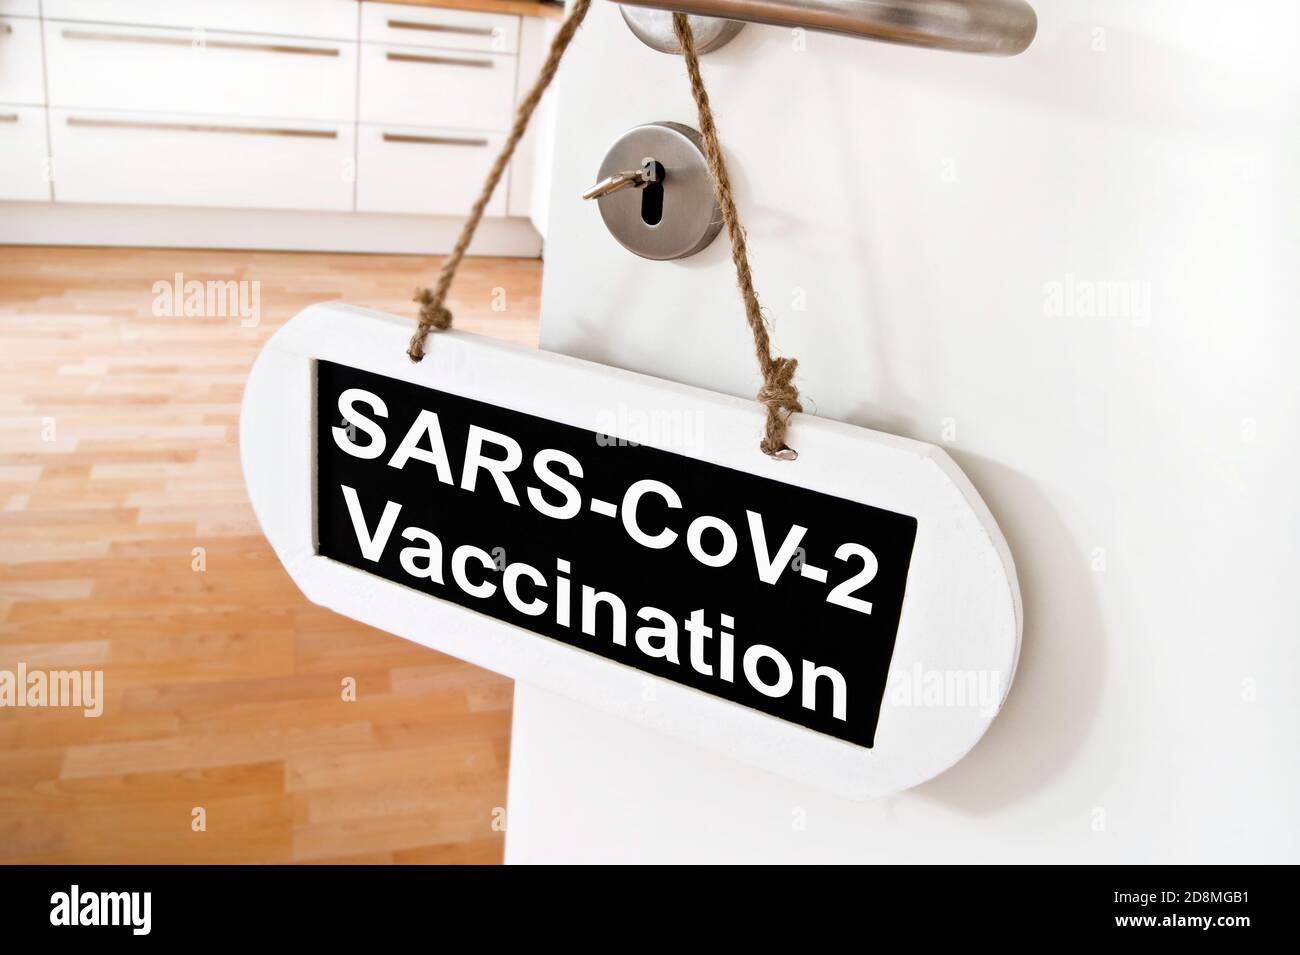 Covid 19 Vaccination Room Sign with Door Stock Photo